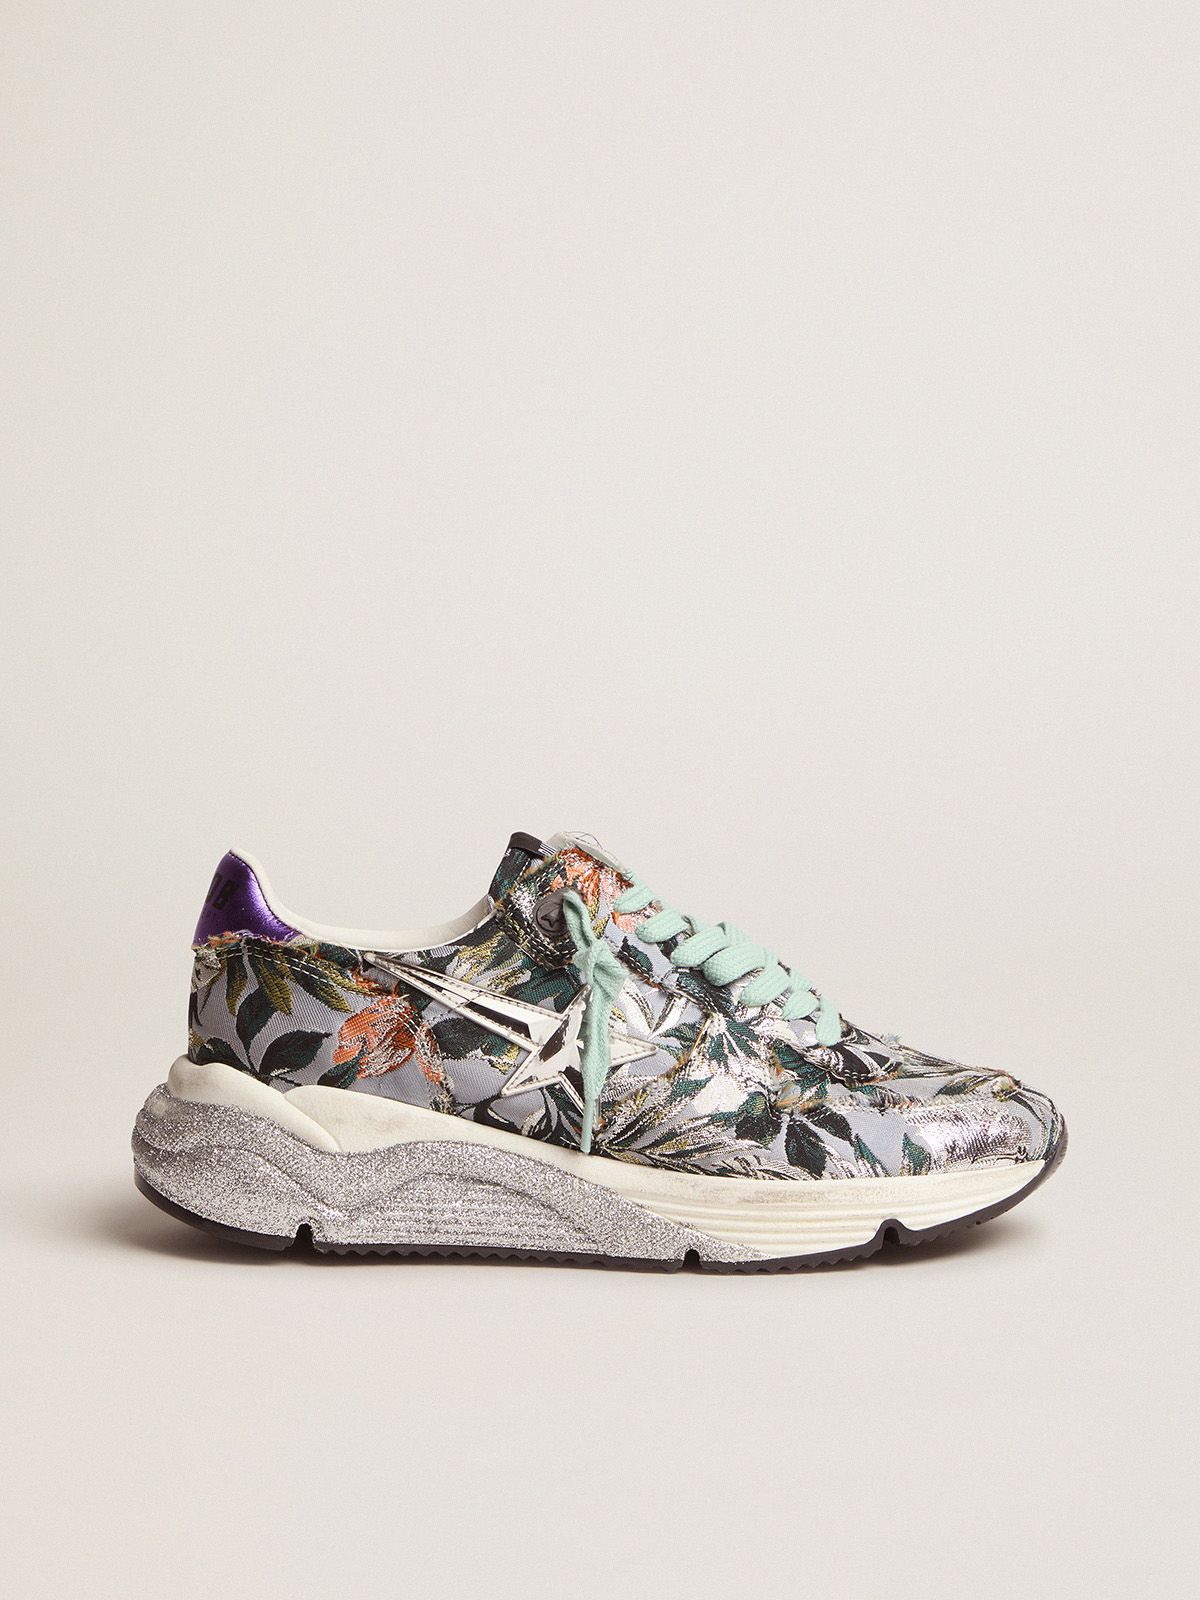 Golden Goose Ball Star Uomo Running Sole sneakers with floral jacquard upper